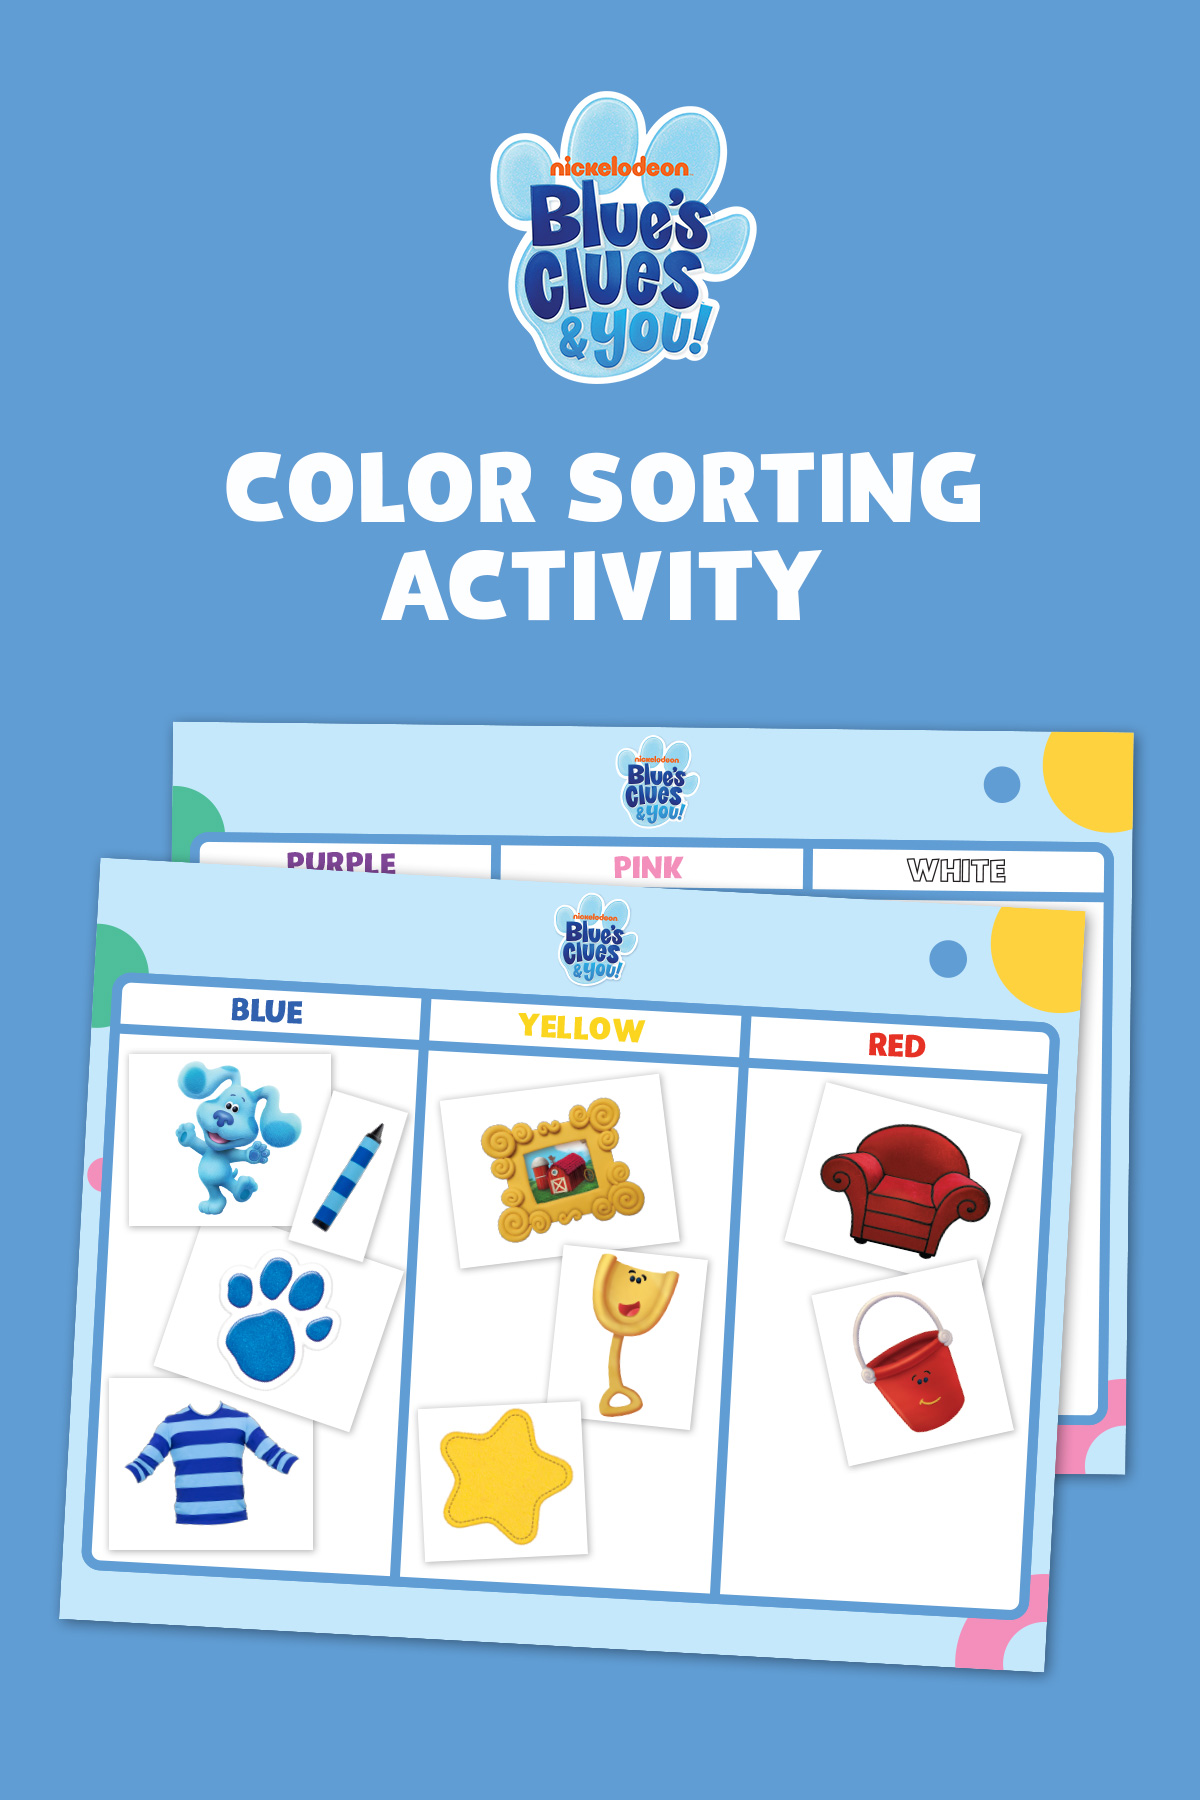 Blue's Clues & You! Color Sorting Activity